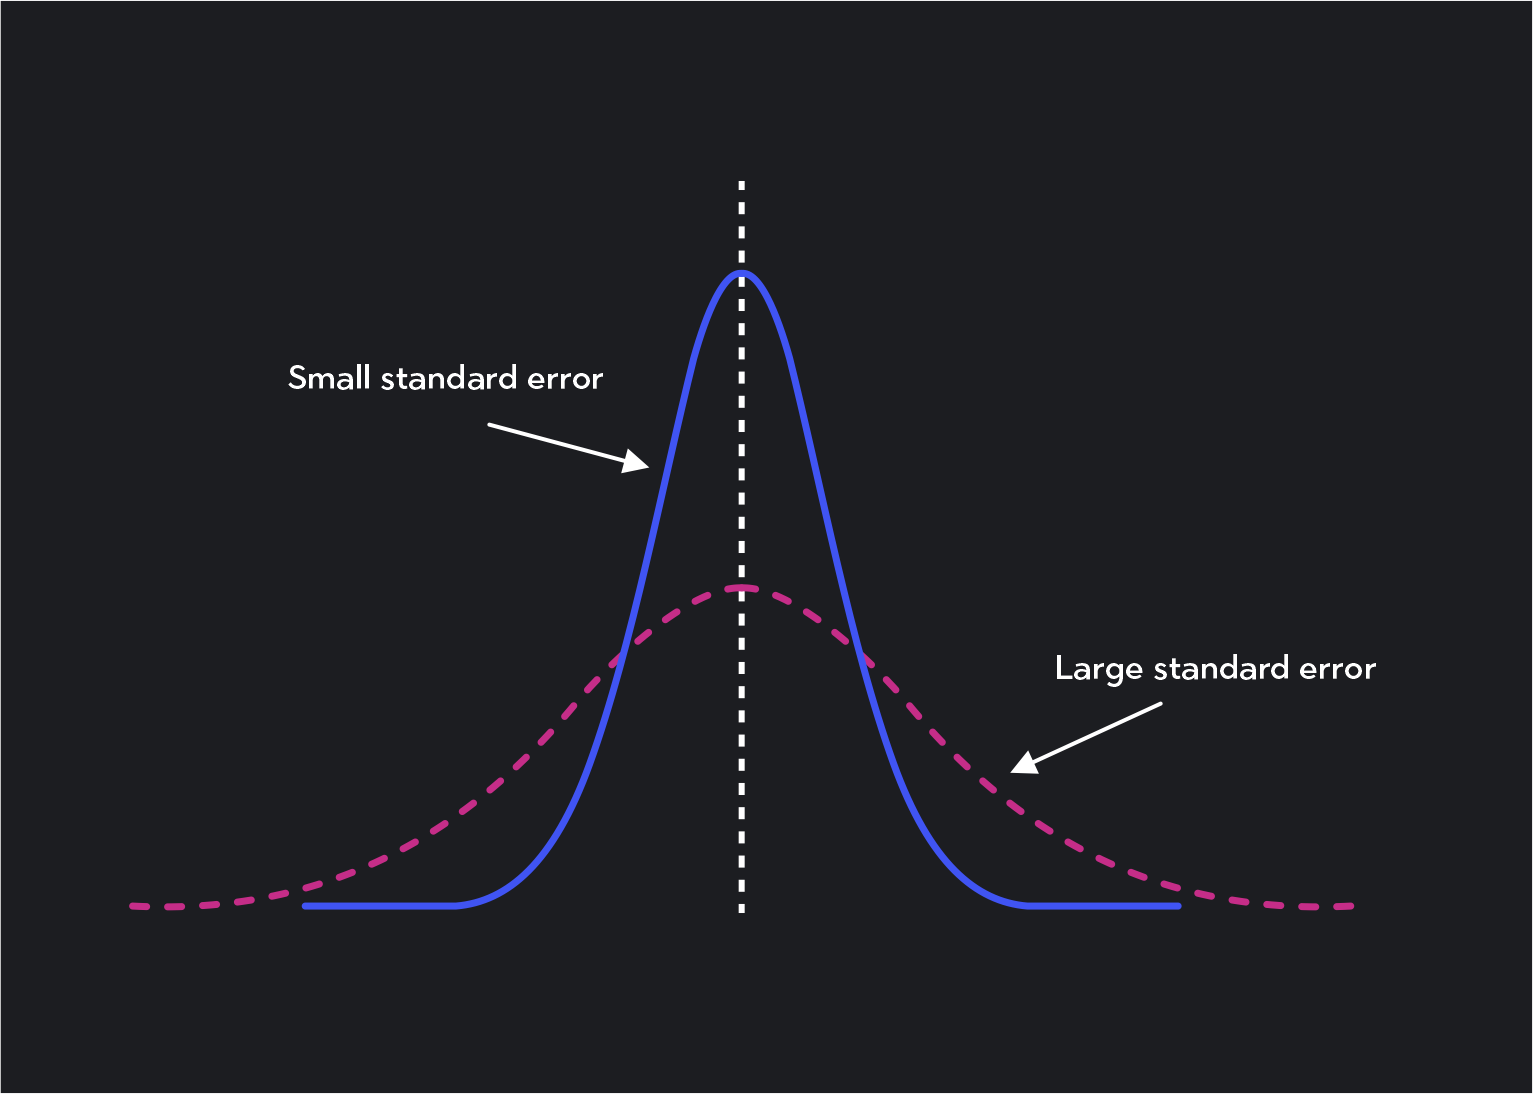  Graph showing small standard error and large standard error